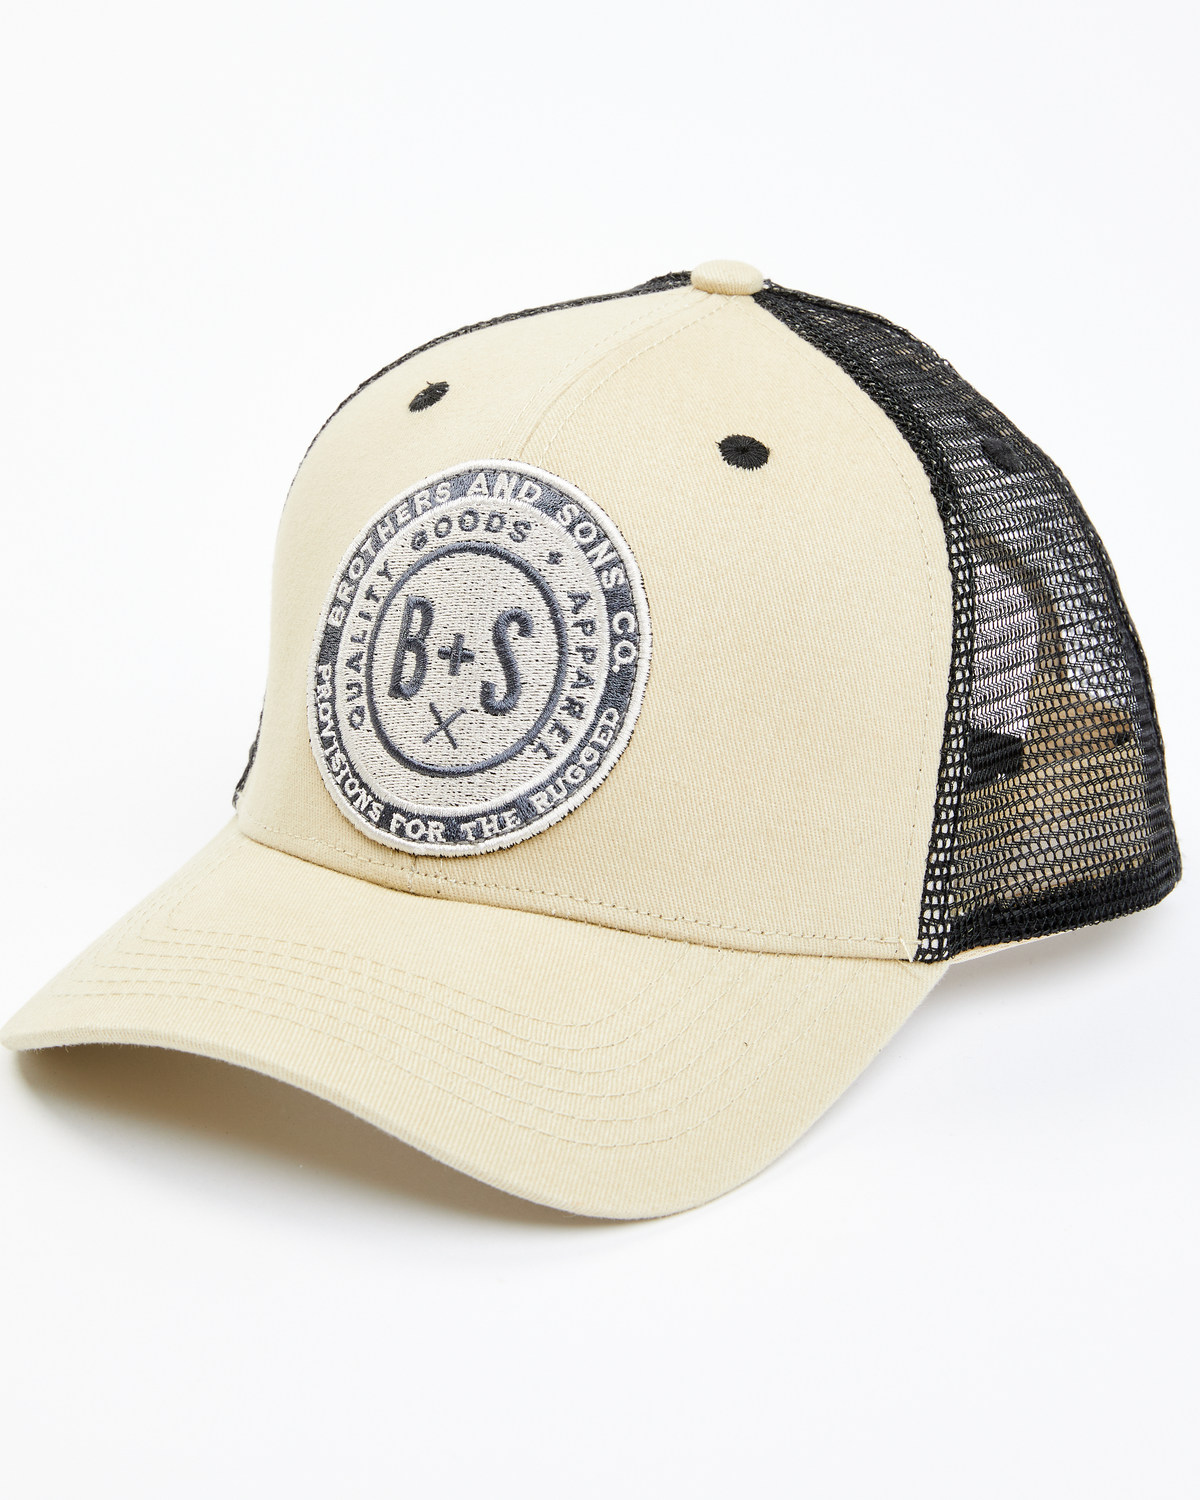 Brothers and Sons Men's Quality Goods Circle Patch Ball Cap